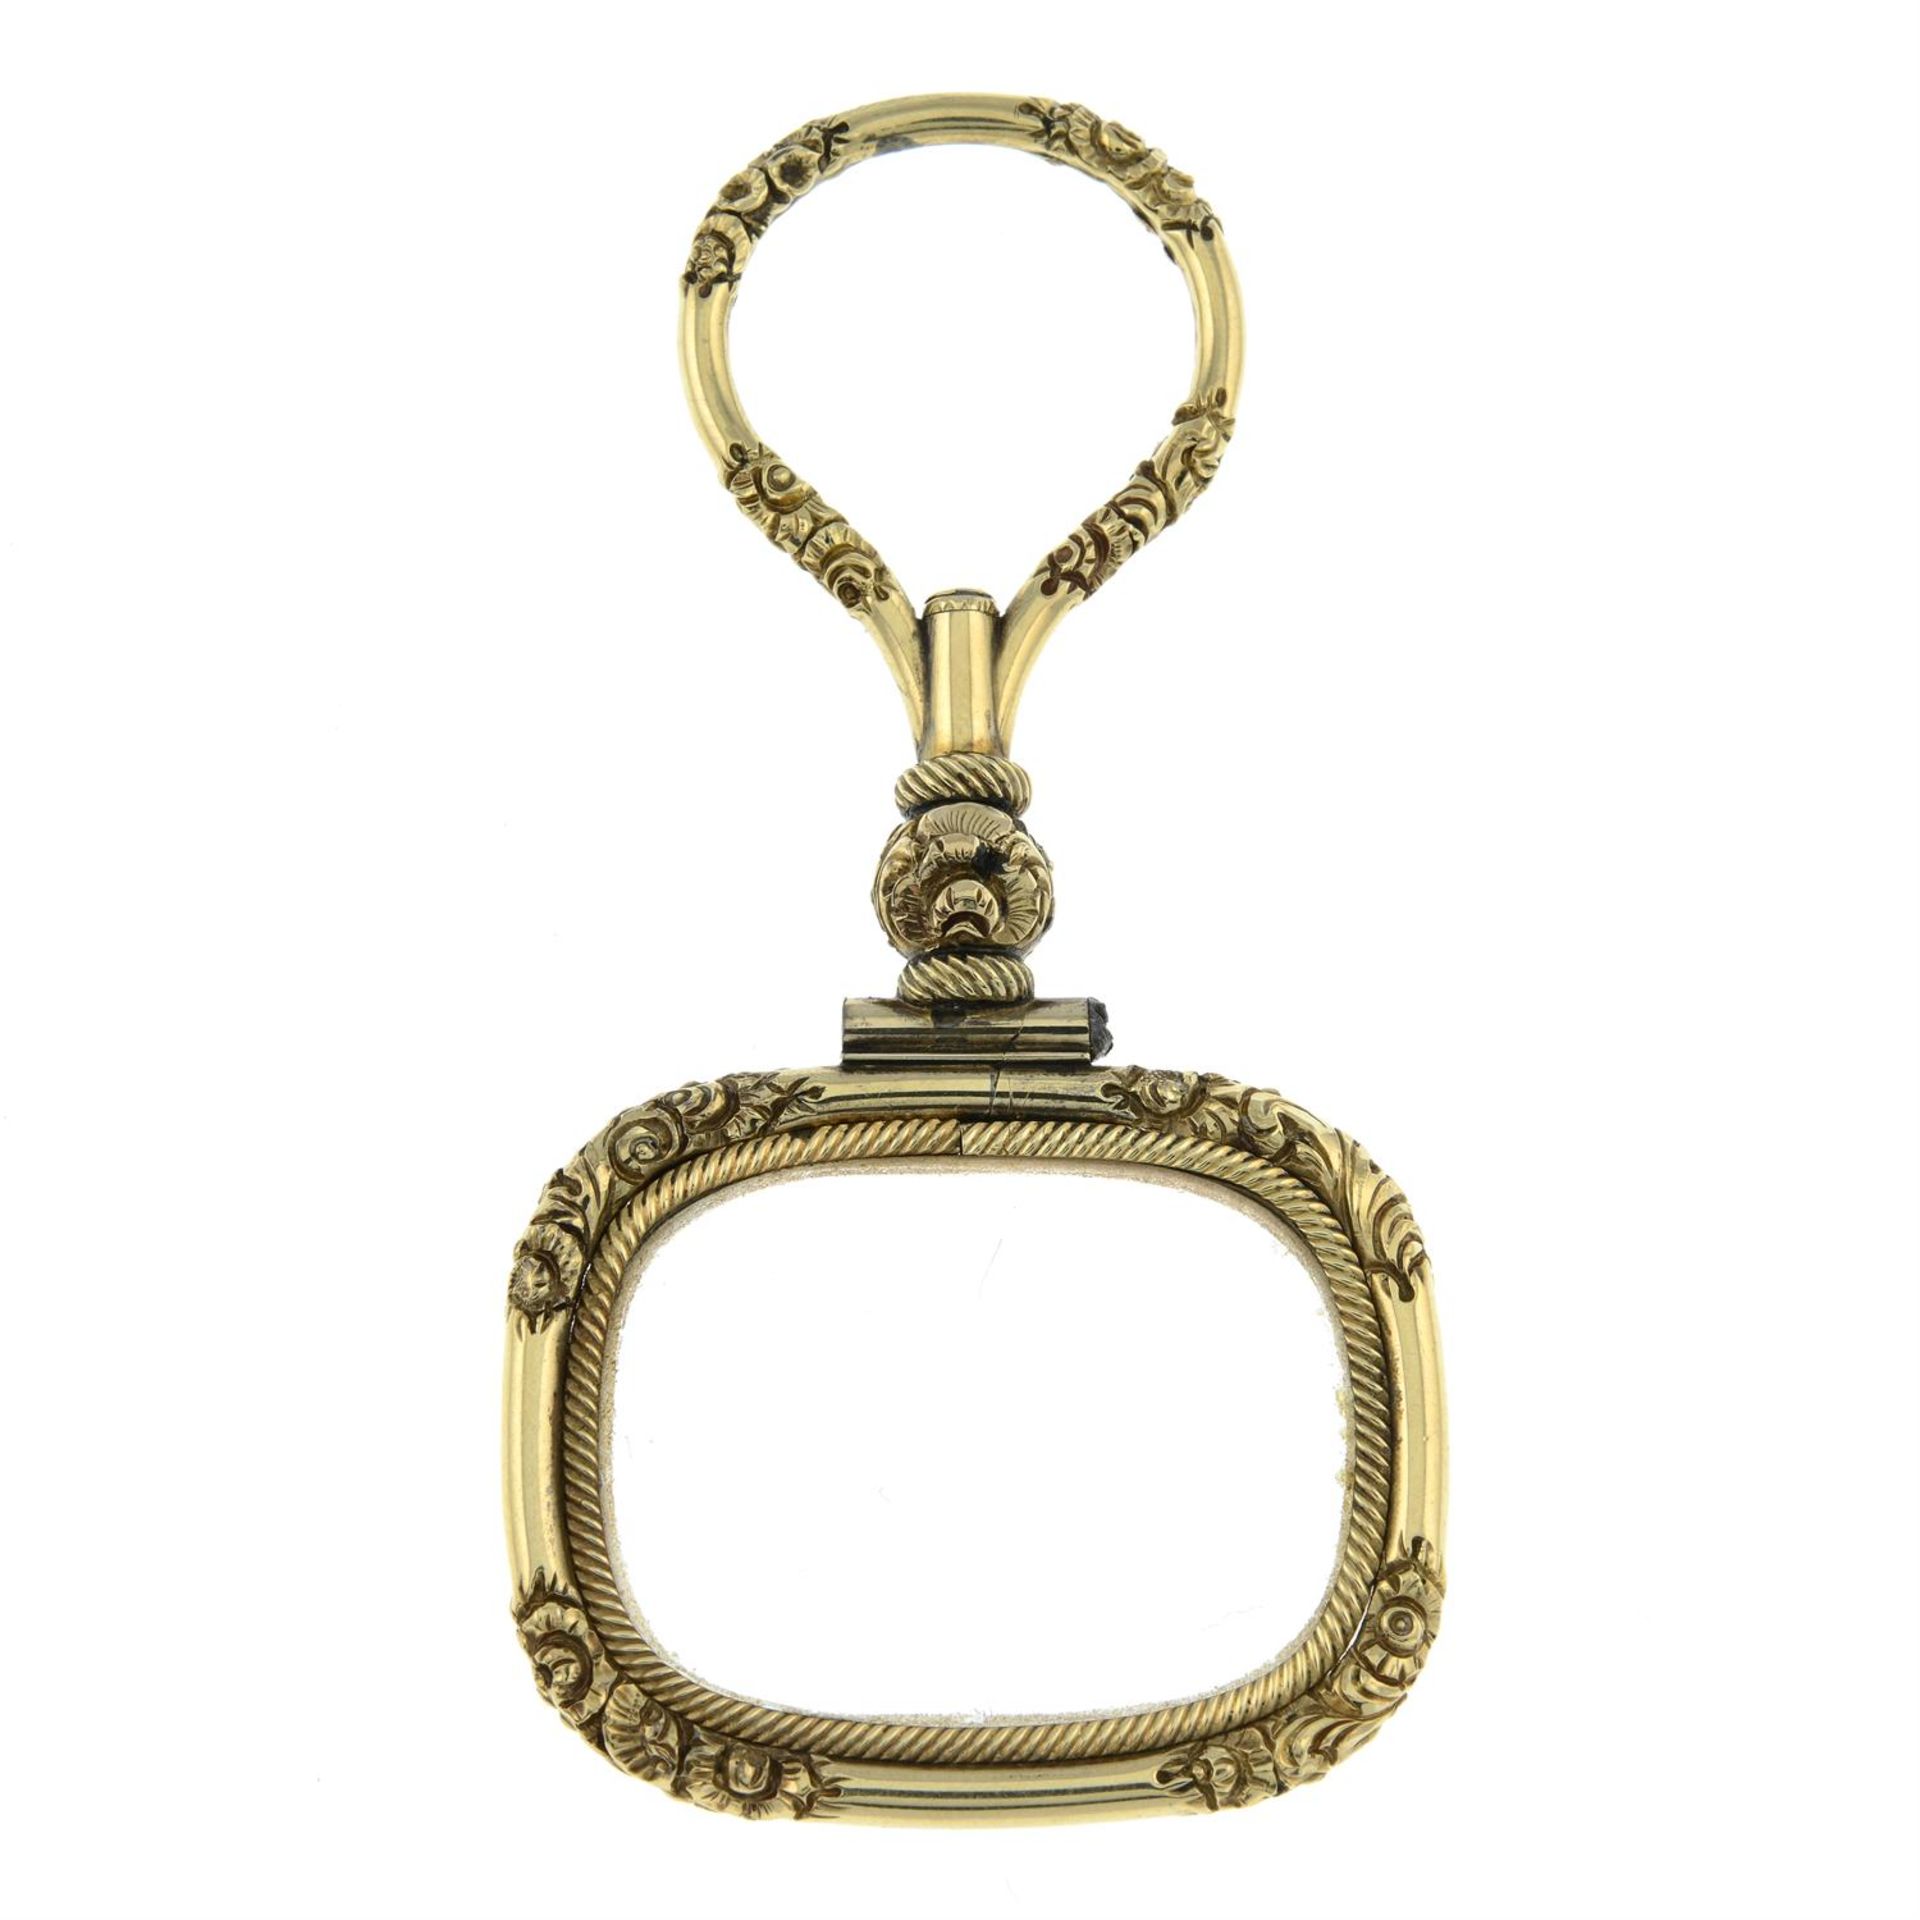 A late 19th century gold magnifying glass.